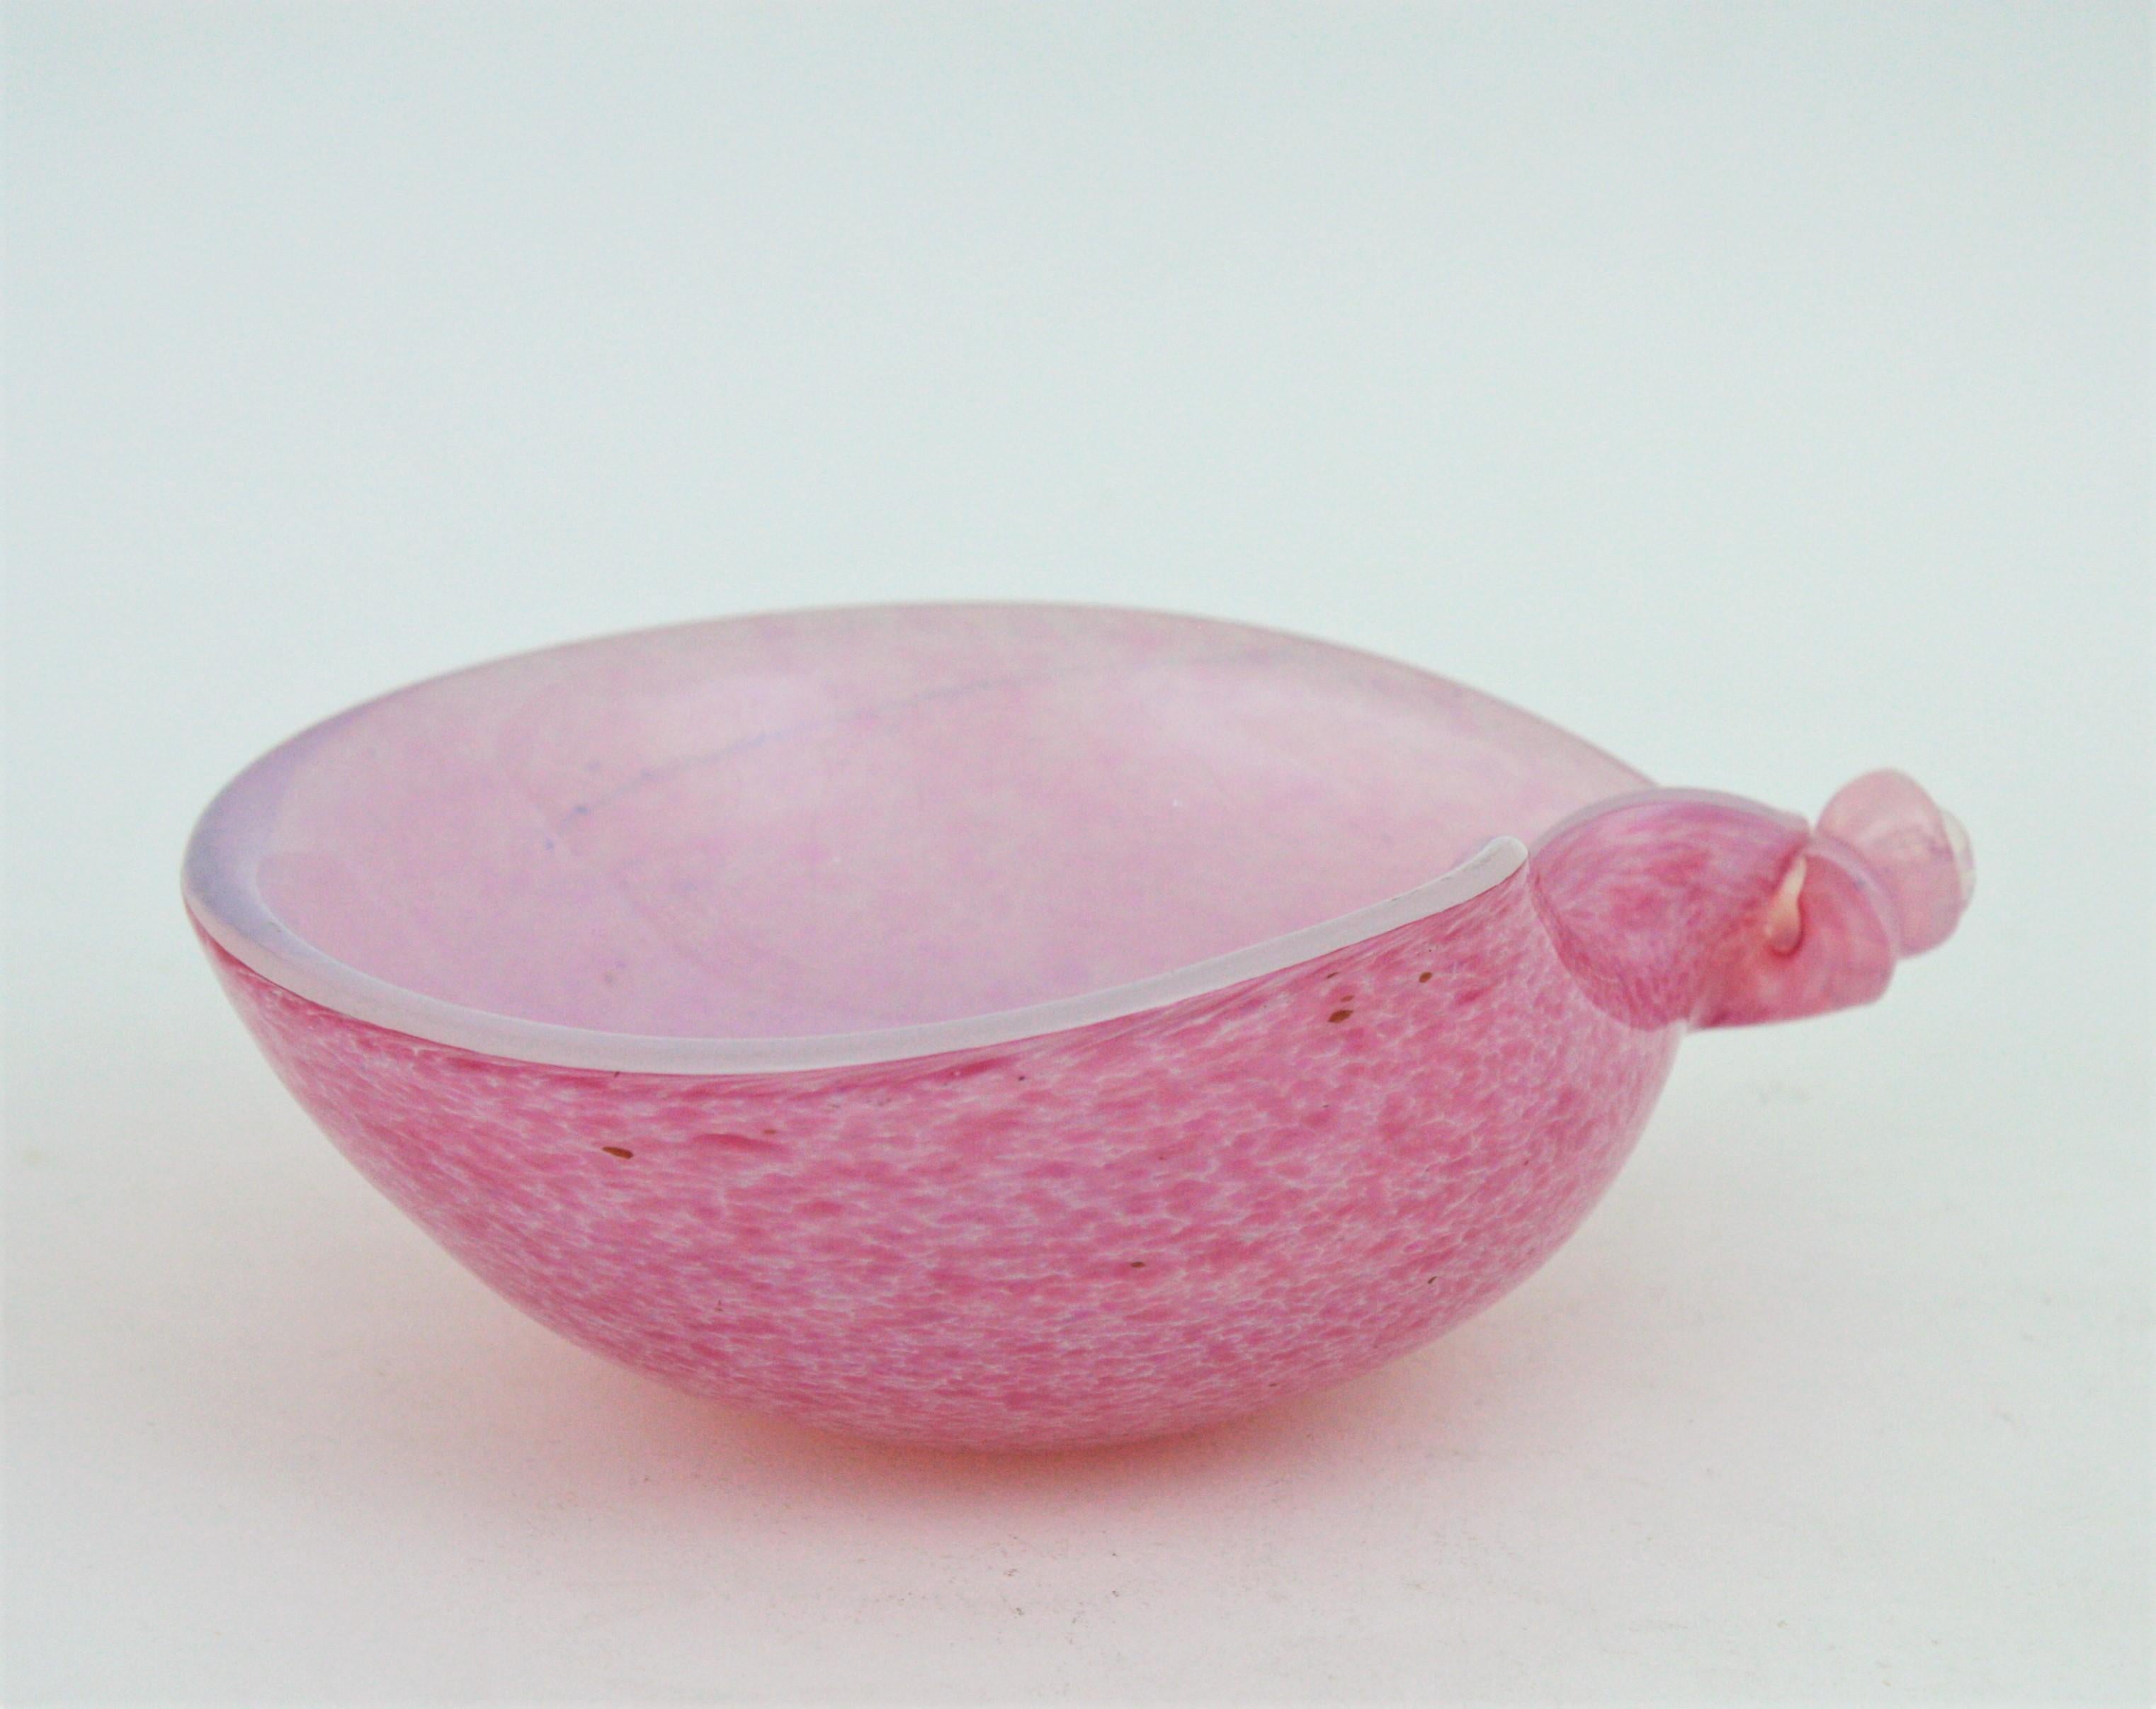 Archimede Seguso Murano Glass Opalescent Pink White Sea Shell Bowl, Italy, 1960s For Sale 2